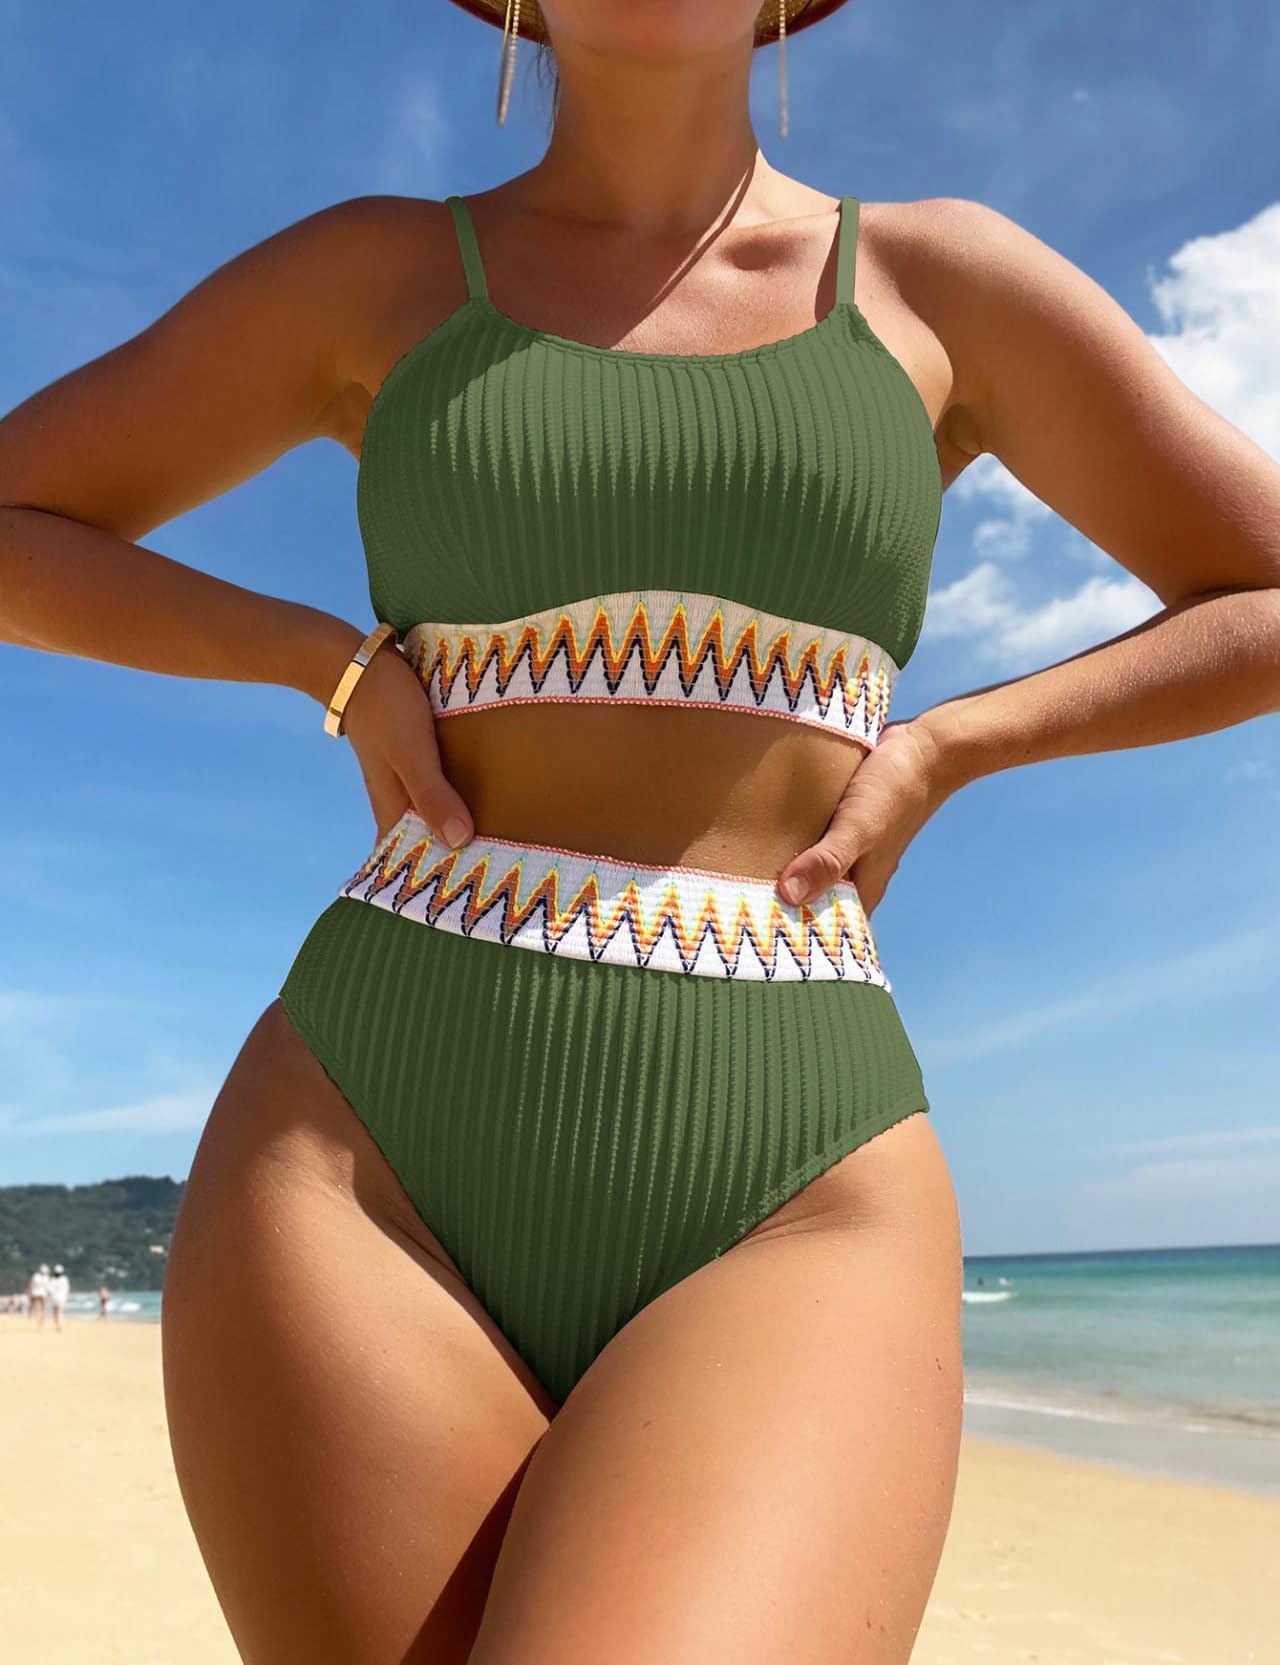 AONTUS Women Two Piece Bandeau Bikini Smocked High Waisted Swimsuits Cute Bathing Suit with Bottoms